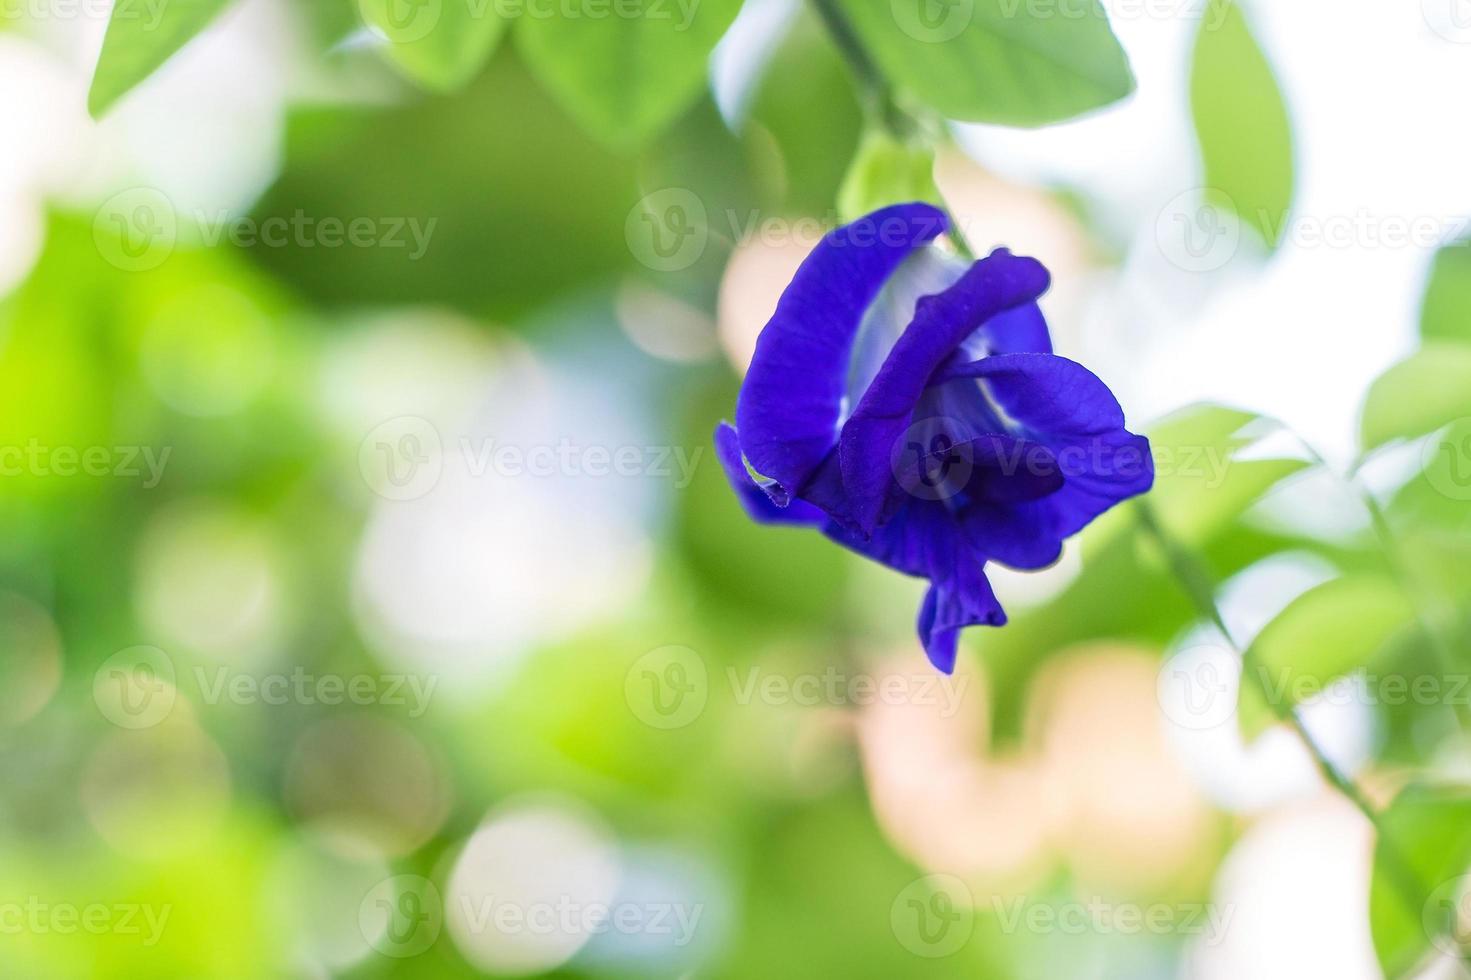 Butterfly pea flowers are naturally beautiful blue-purple flowers. It can used as a food coloring which contains anthocyanin. photo